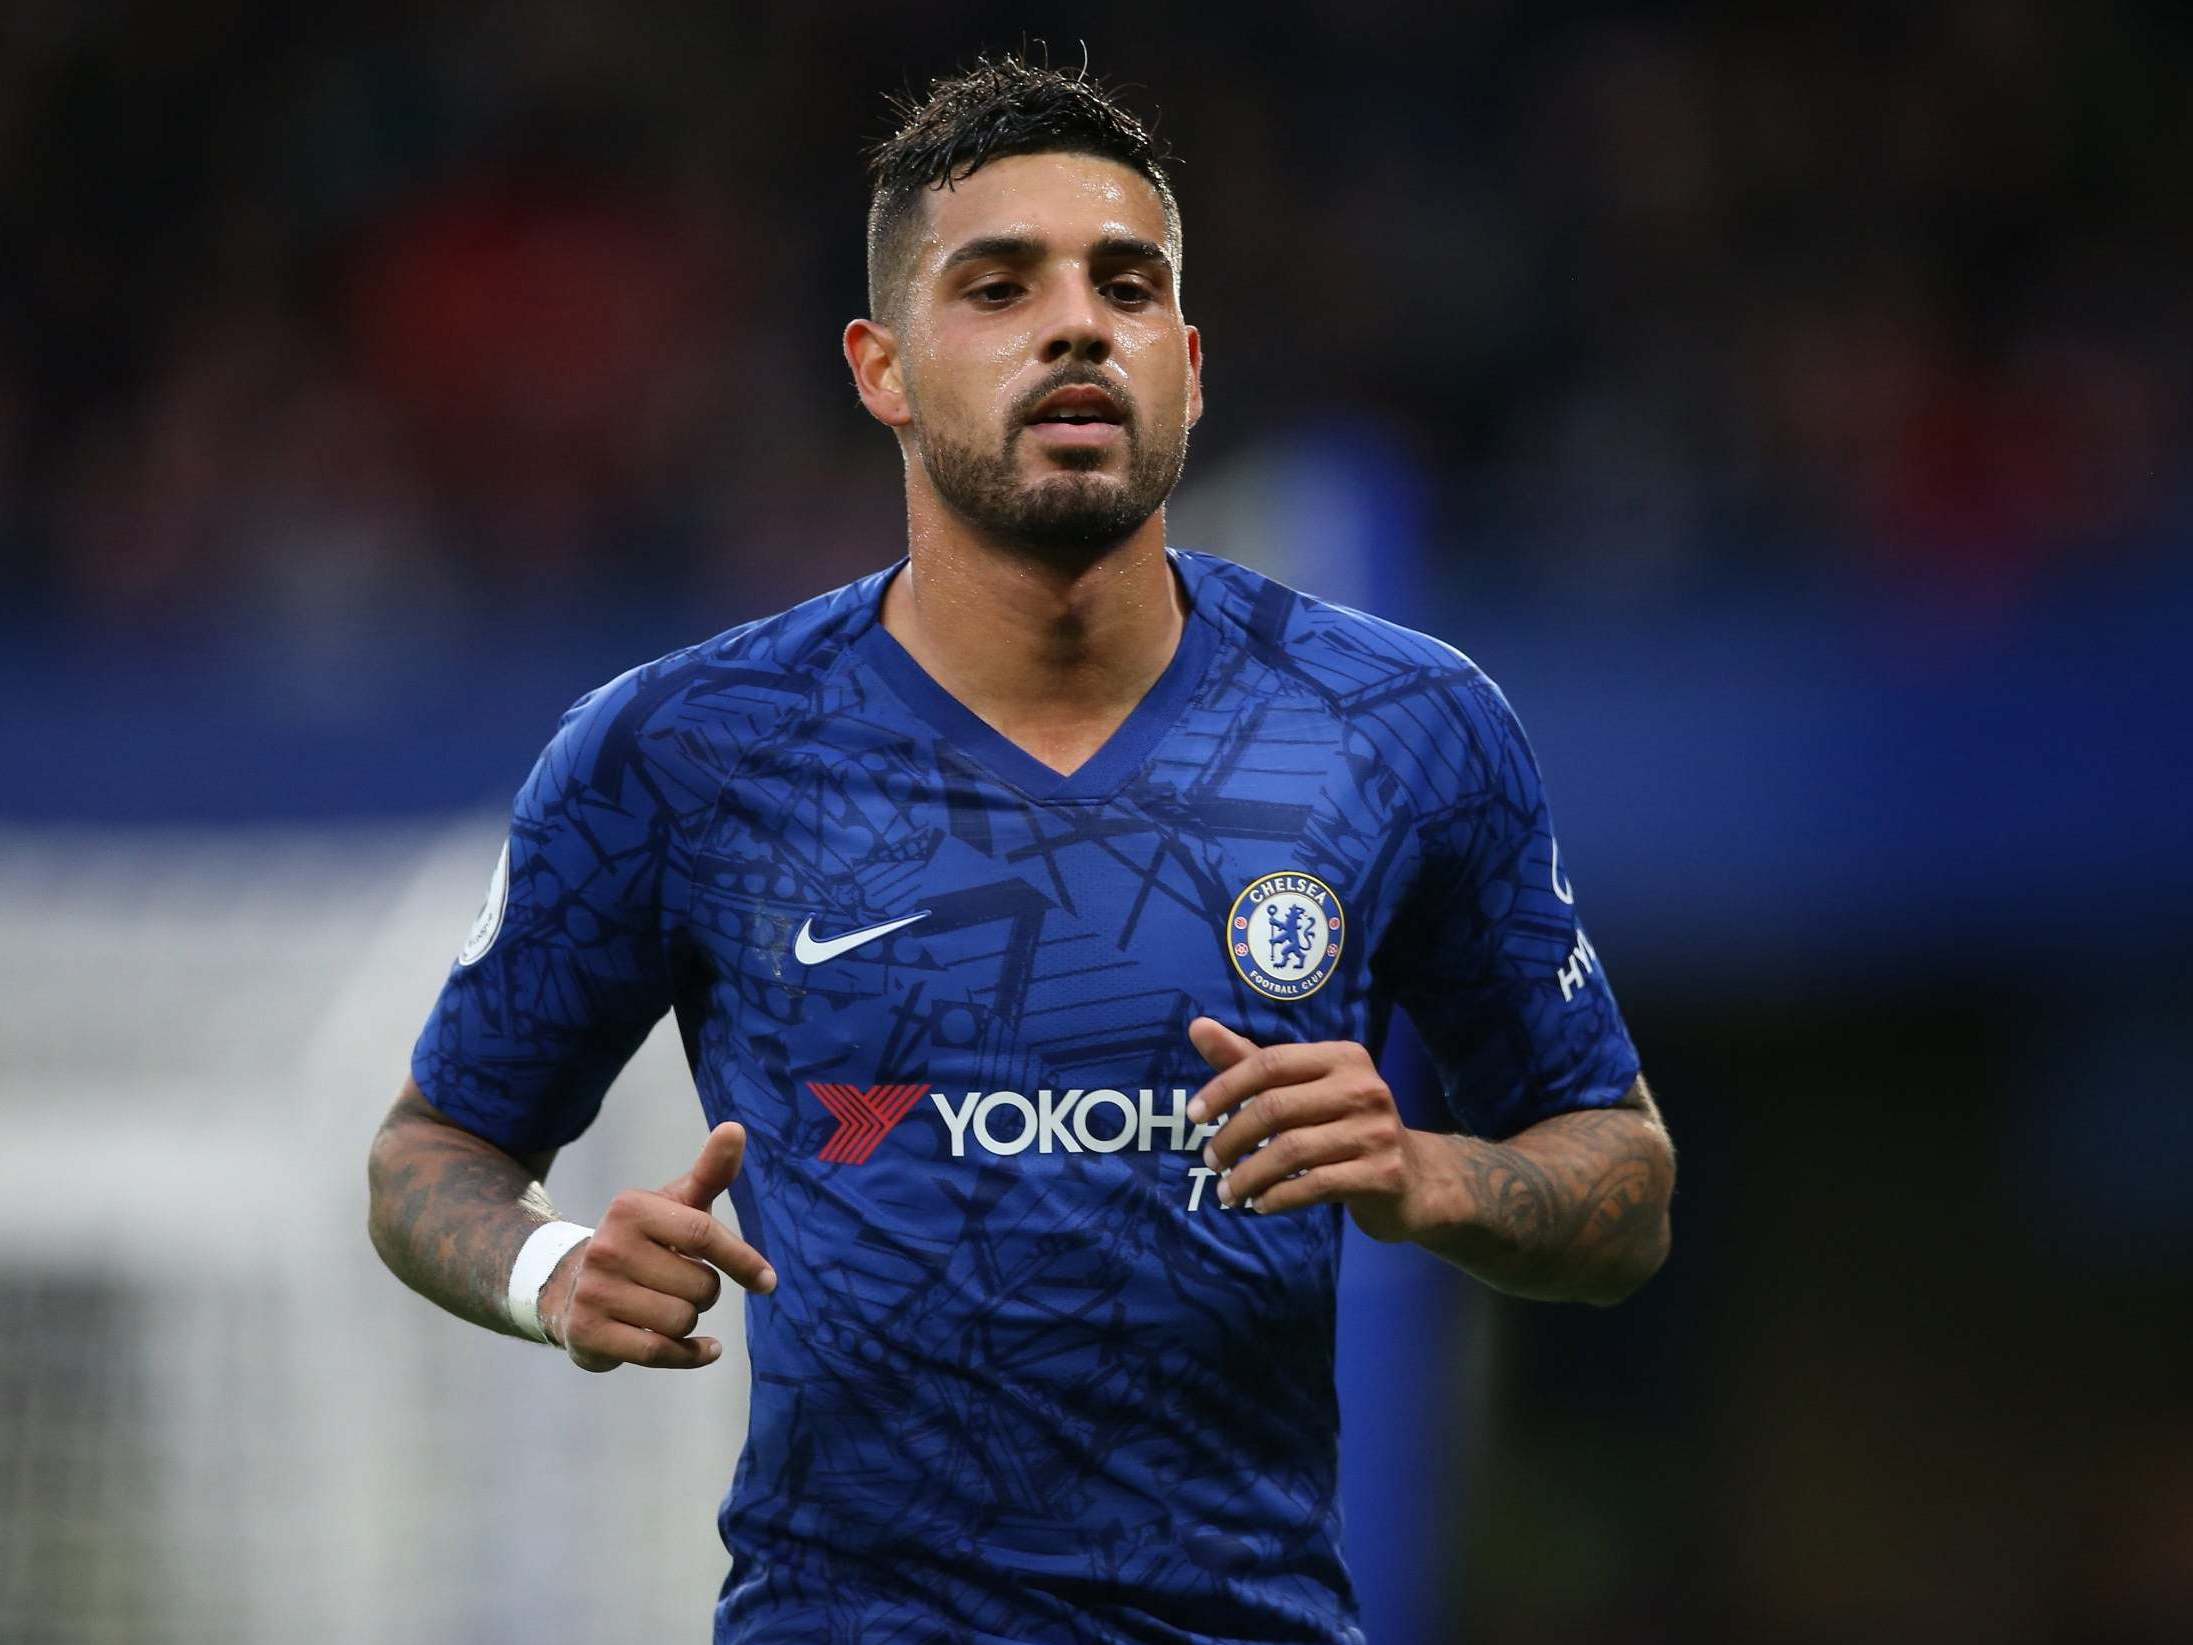 Chelsea transfer news: Emerson Palmieri hits out at 'fake news' over unhappiness under Frank Lampard